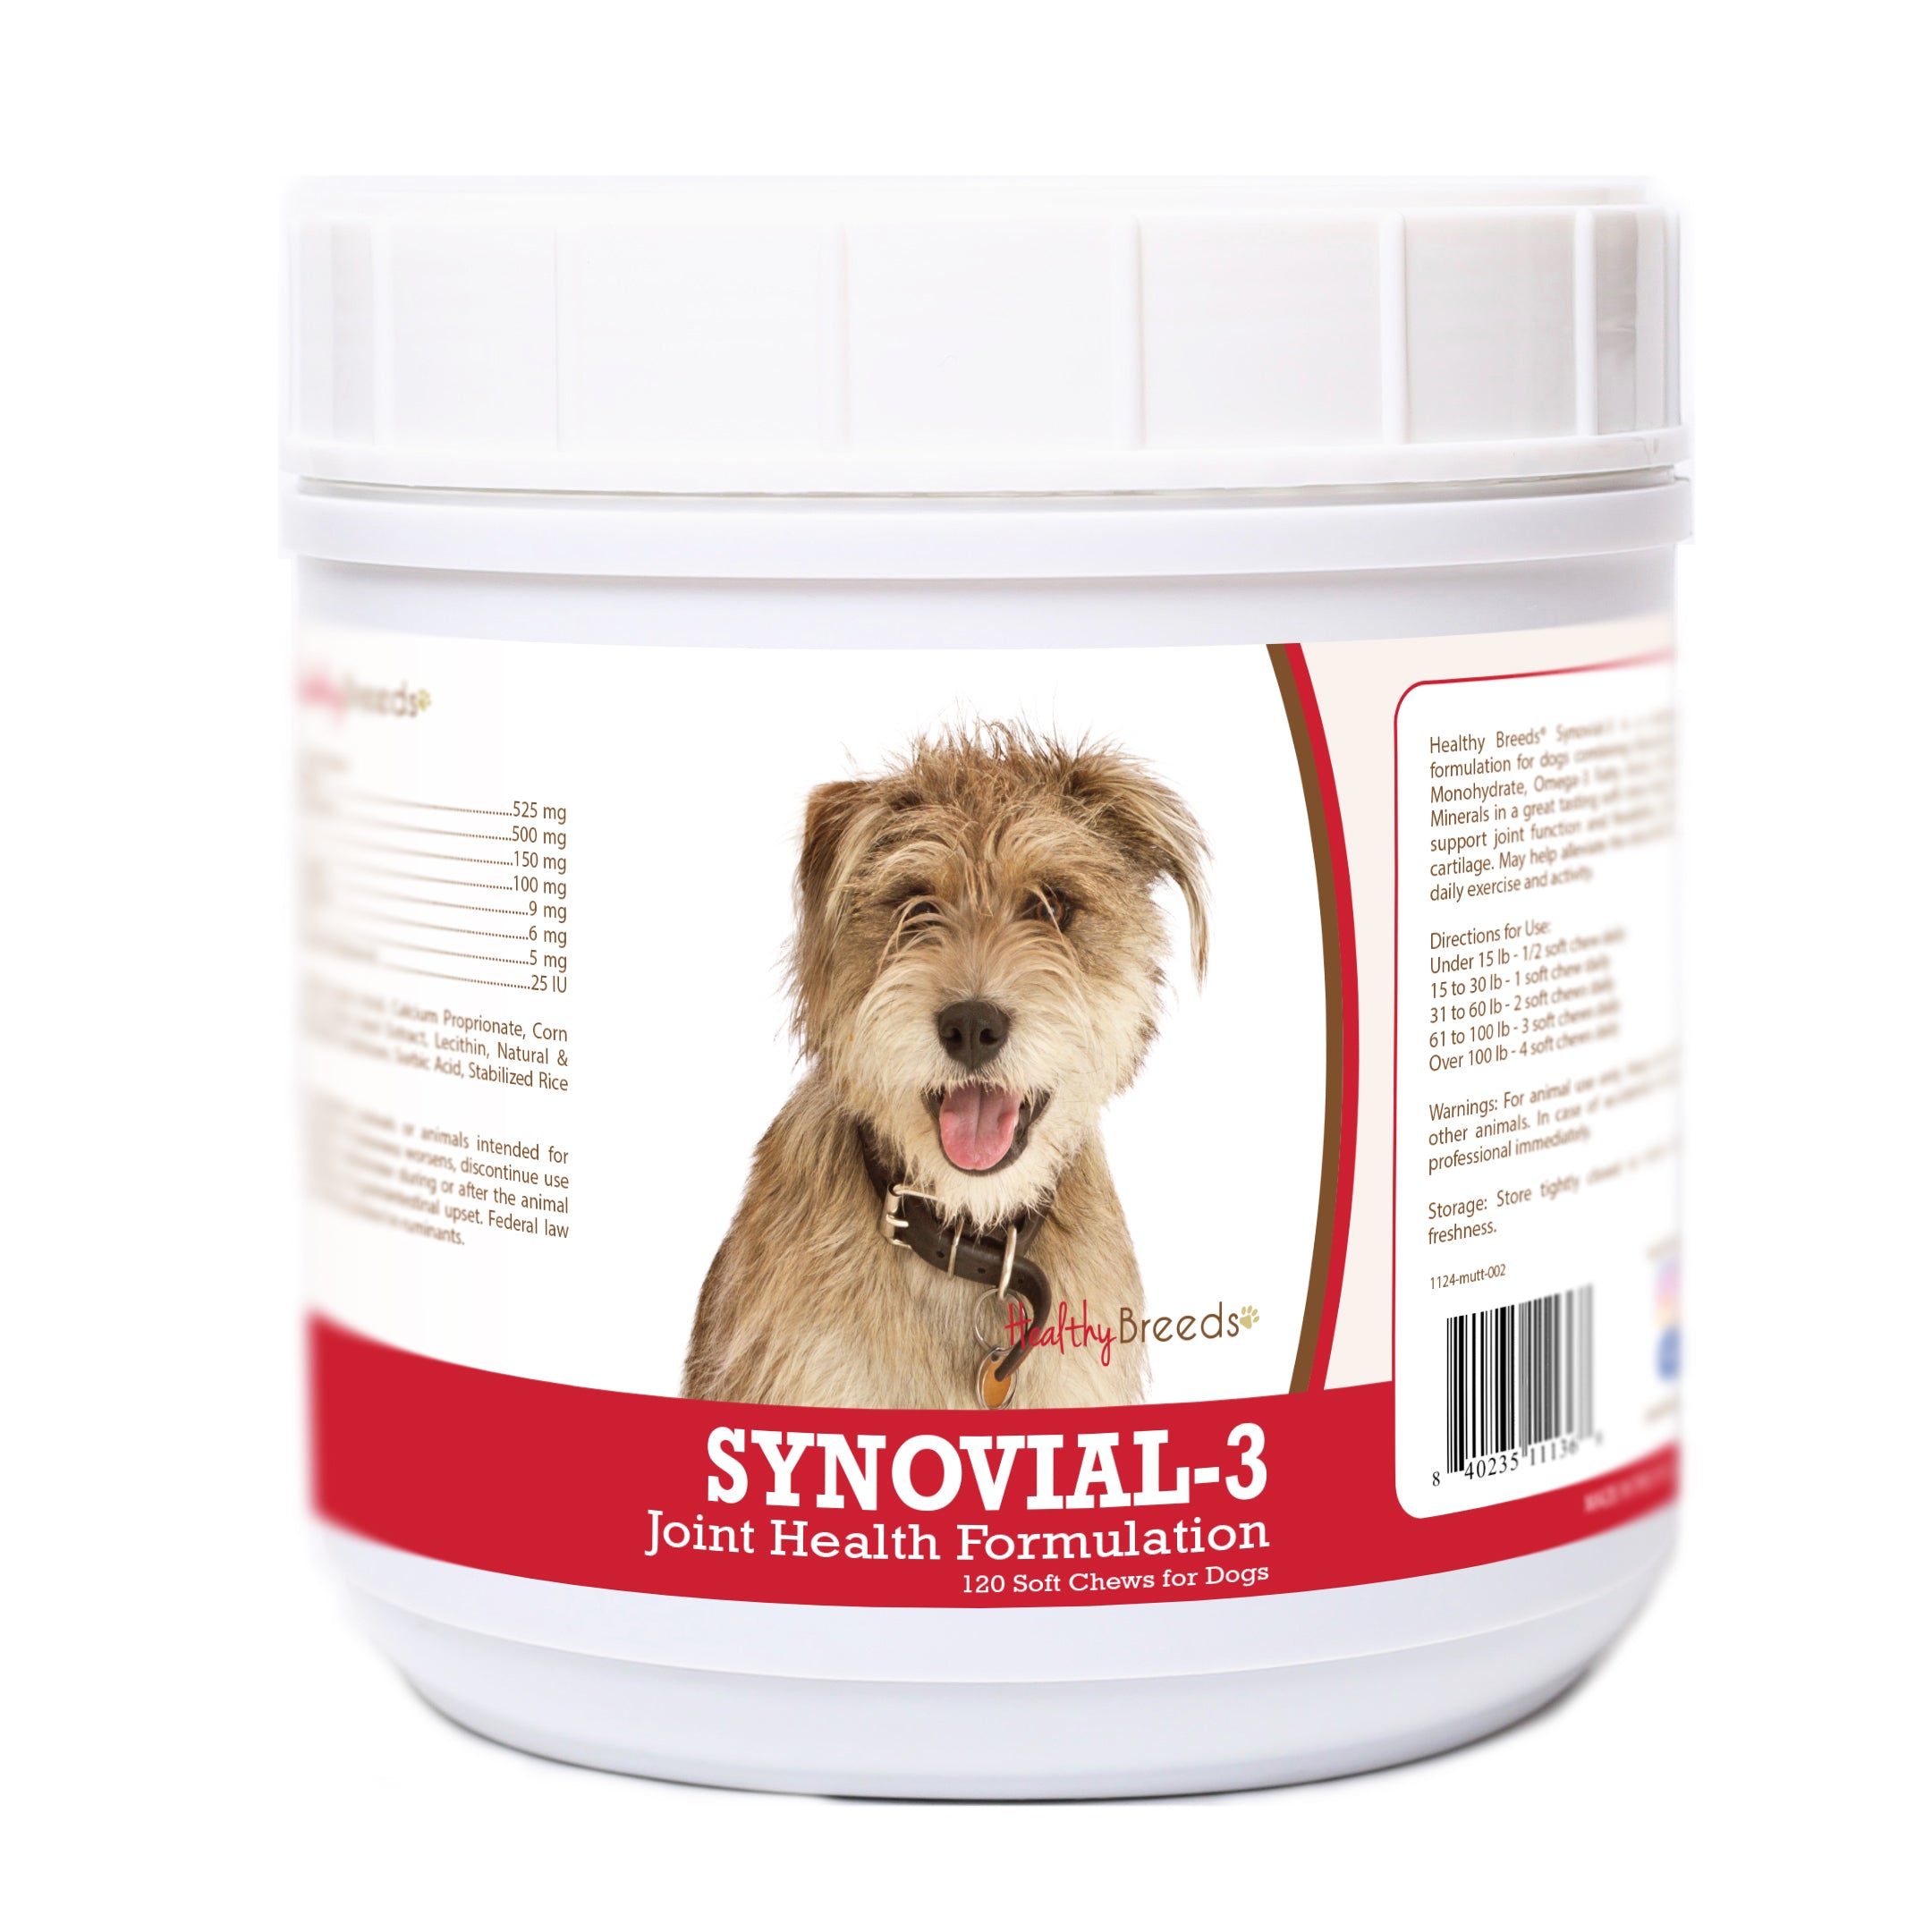 Mutt Synovial-3 Joint Health Formulation Soft Chews 120 Count